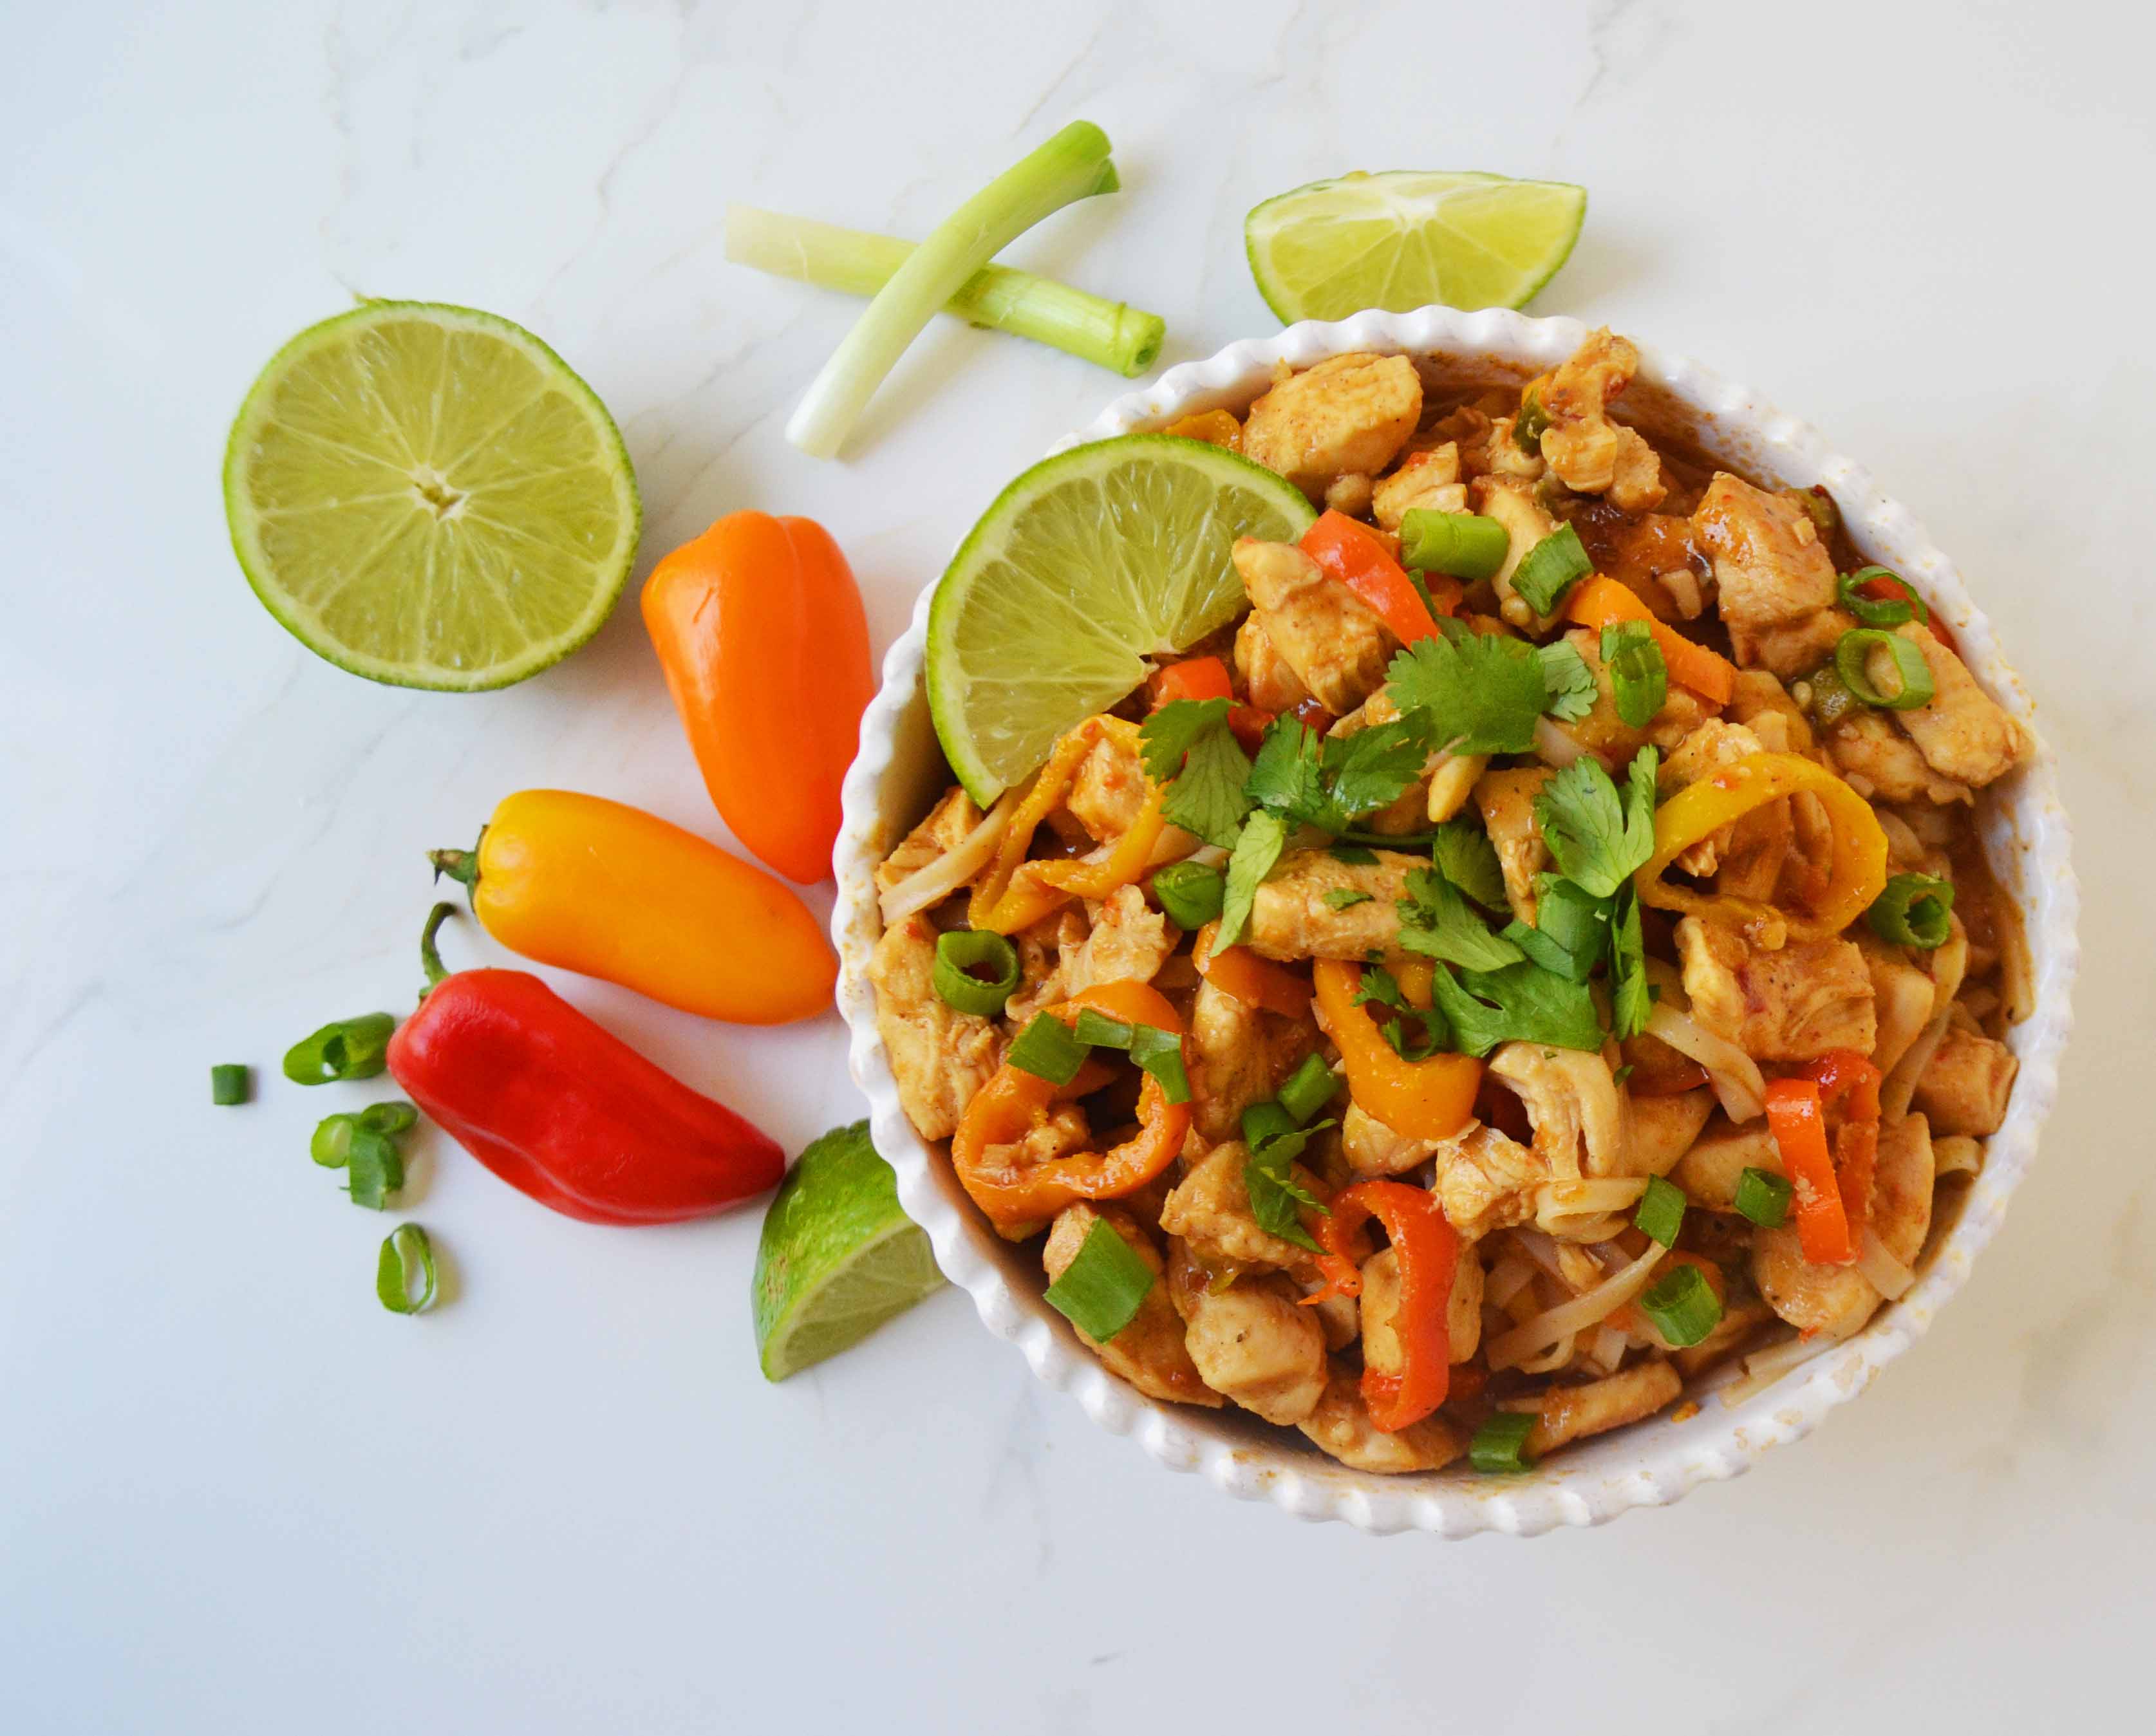 Thai Chicken Noodles by Modern Honey. Gluten-free and dairy-free dinner made in less than 30 minutes. www.modernhoney.com